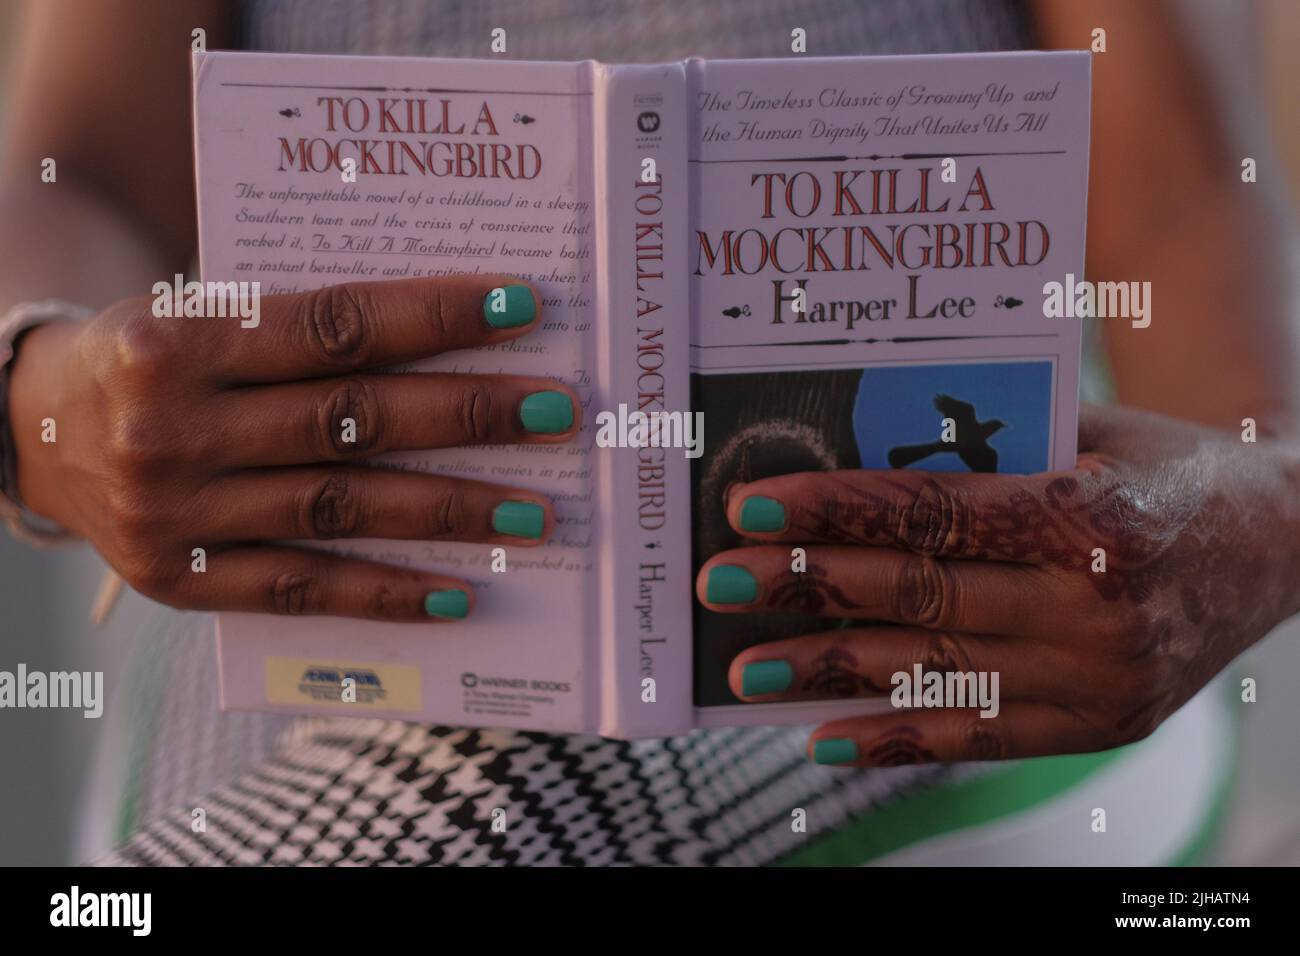 Black woman's hands with henna tattoo and aqua nails hold open the book, To Kill A Mockingbird, on legs wearing black and white houndstooth pants. Stock Photo